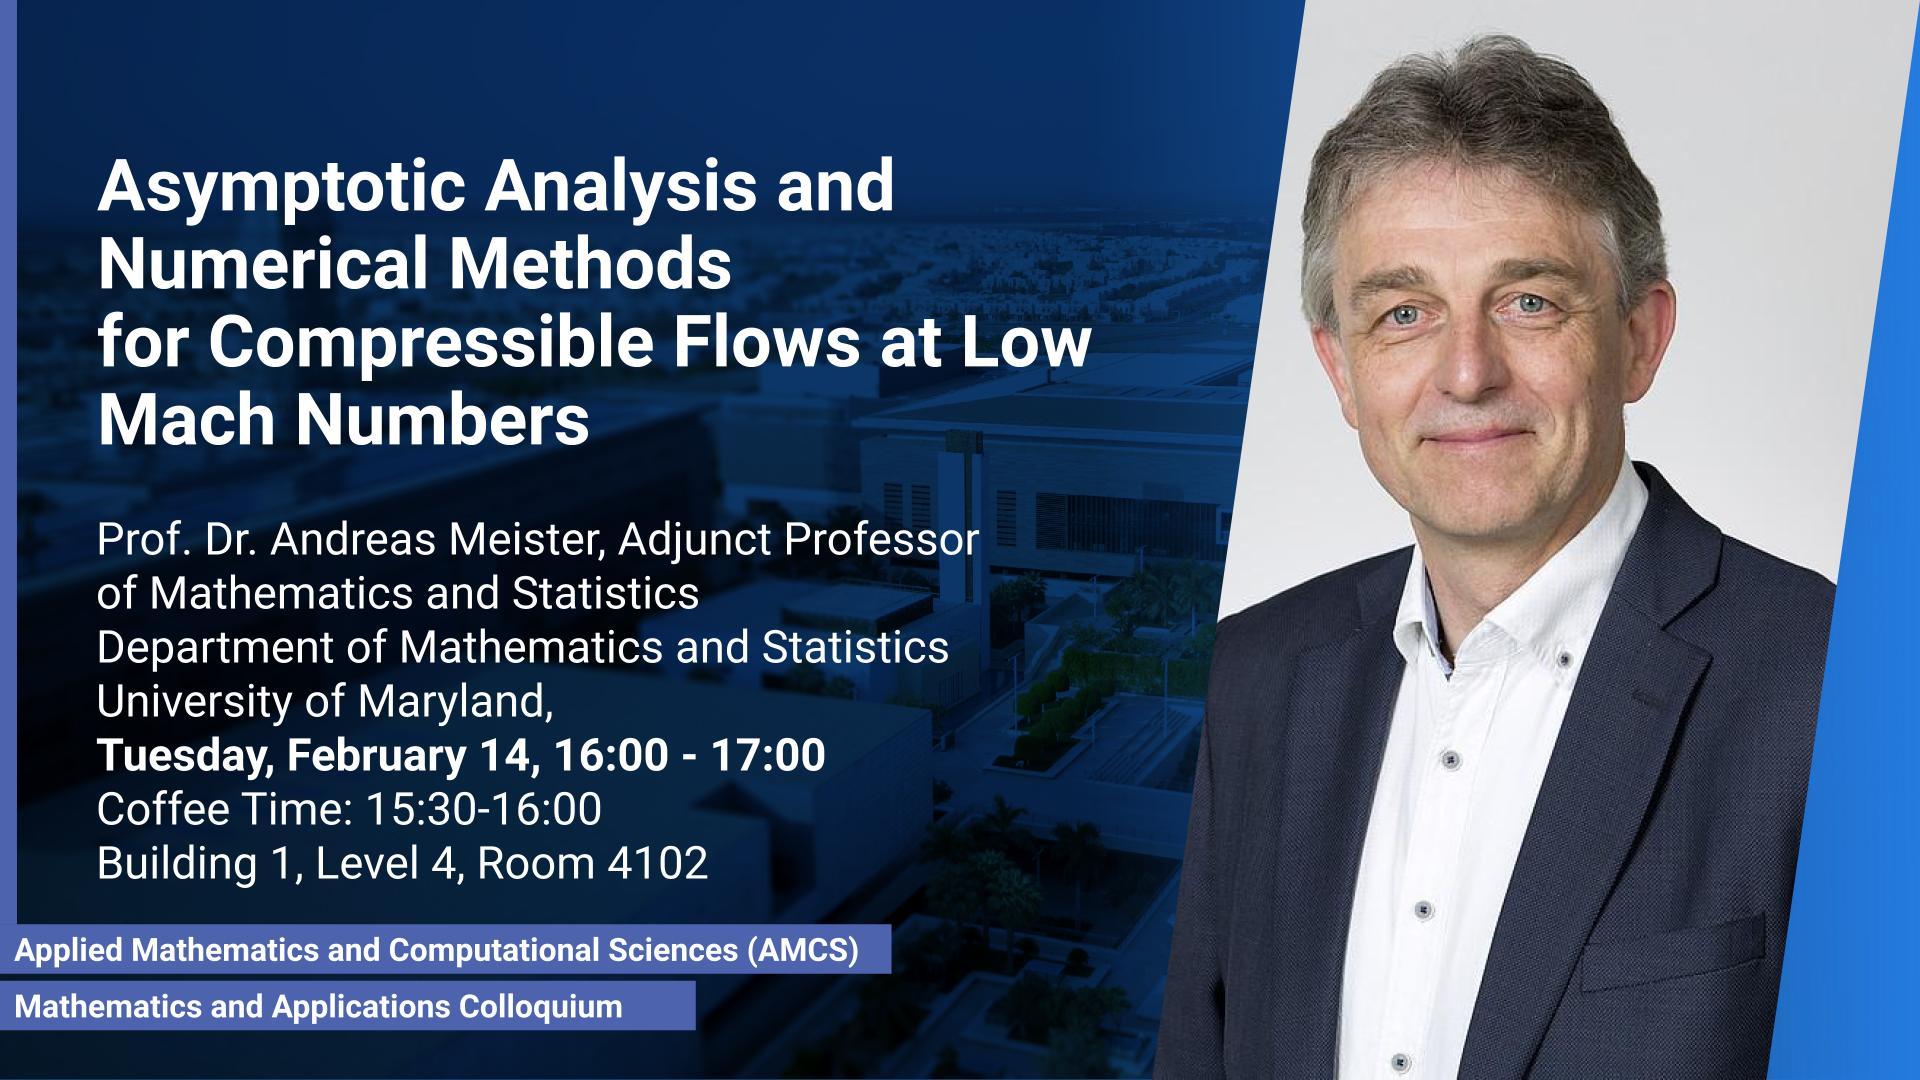 KAUST-CEMSE-AMCS-Mathematics-Colloquium-Dr. Andreas-Meister-Asymptotic-Analysis-Numerical-Methods-Compressible-Flows